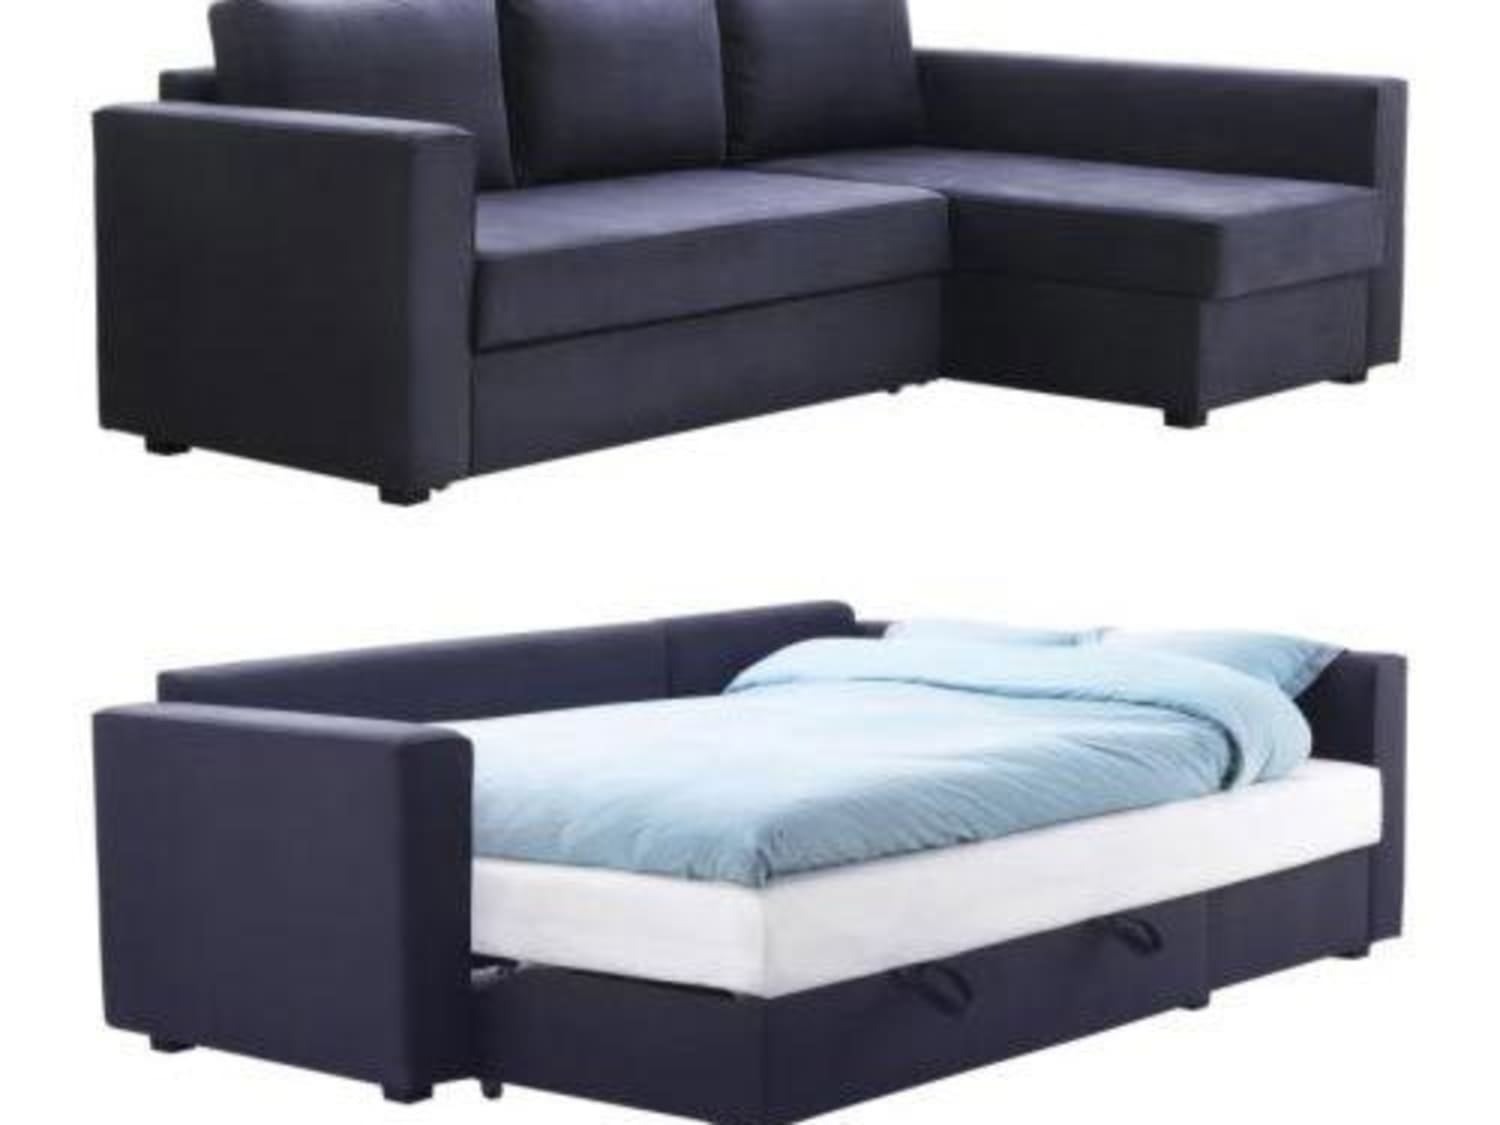 MANSTAD Sectional Sofa Bed Storage from IKEA | Apartment